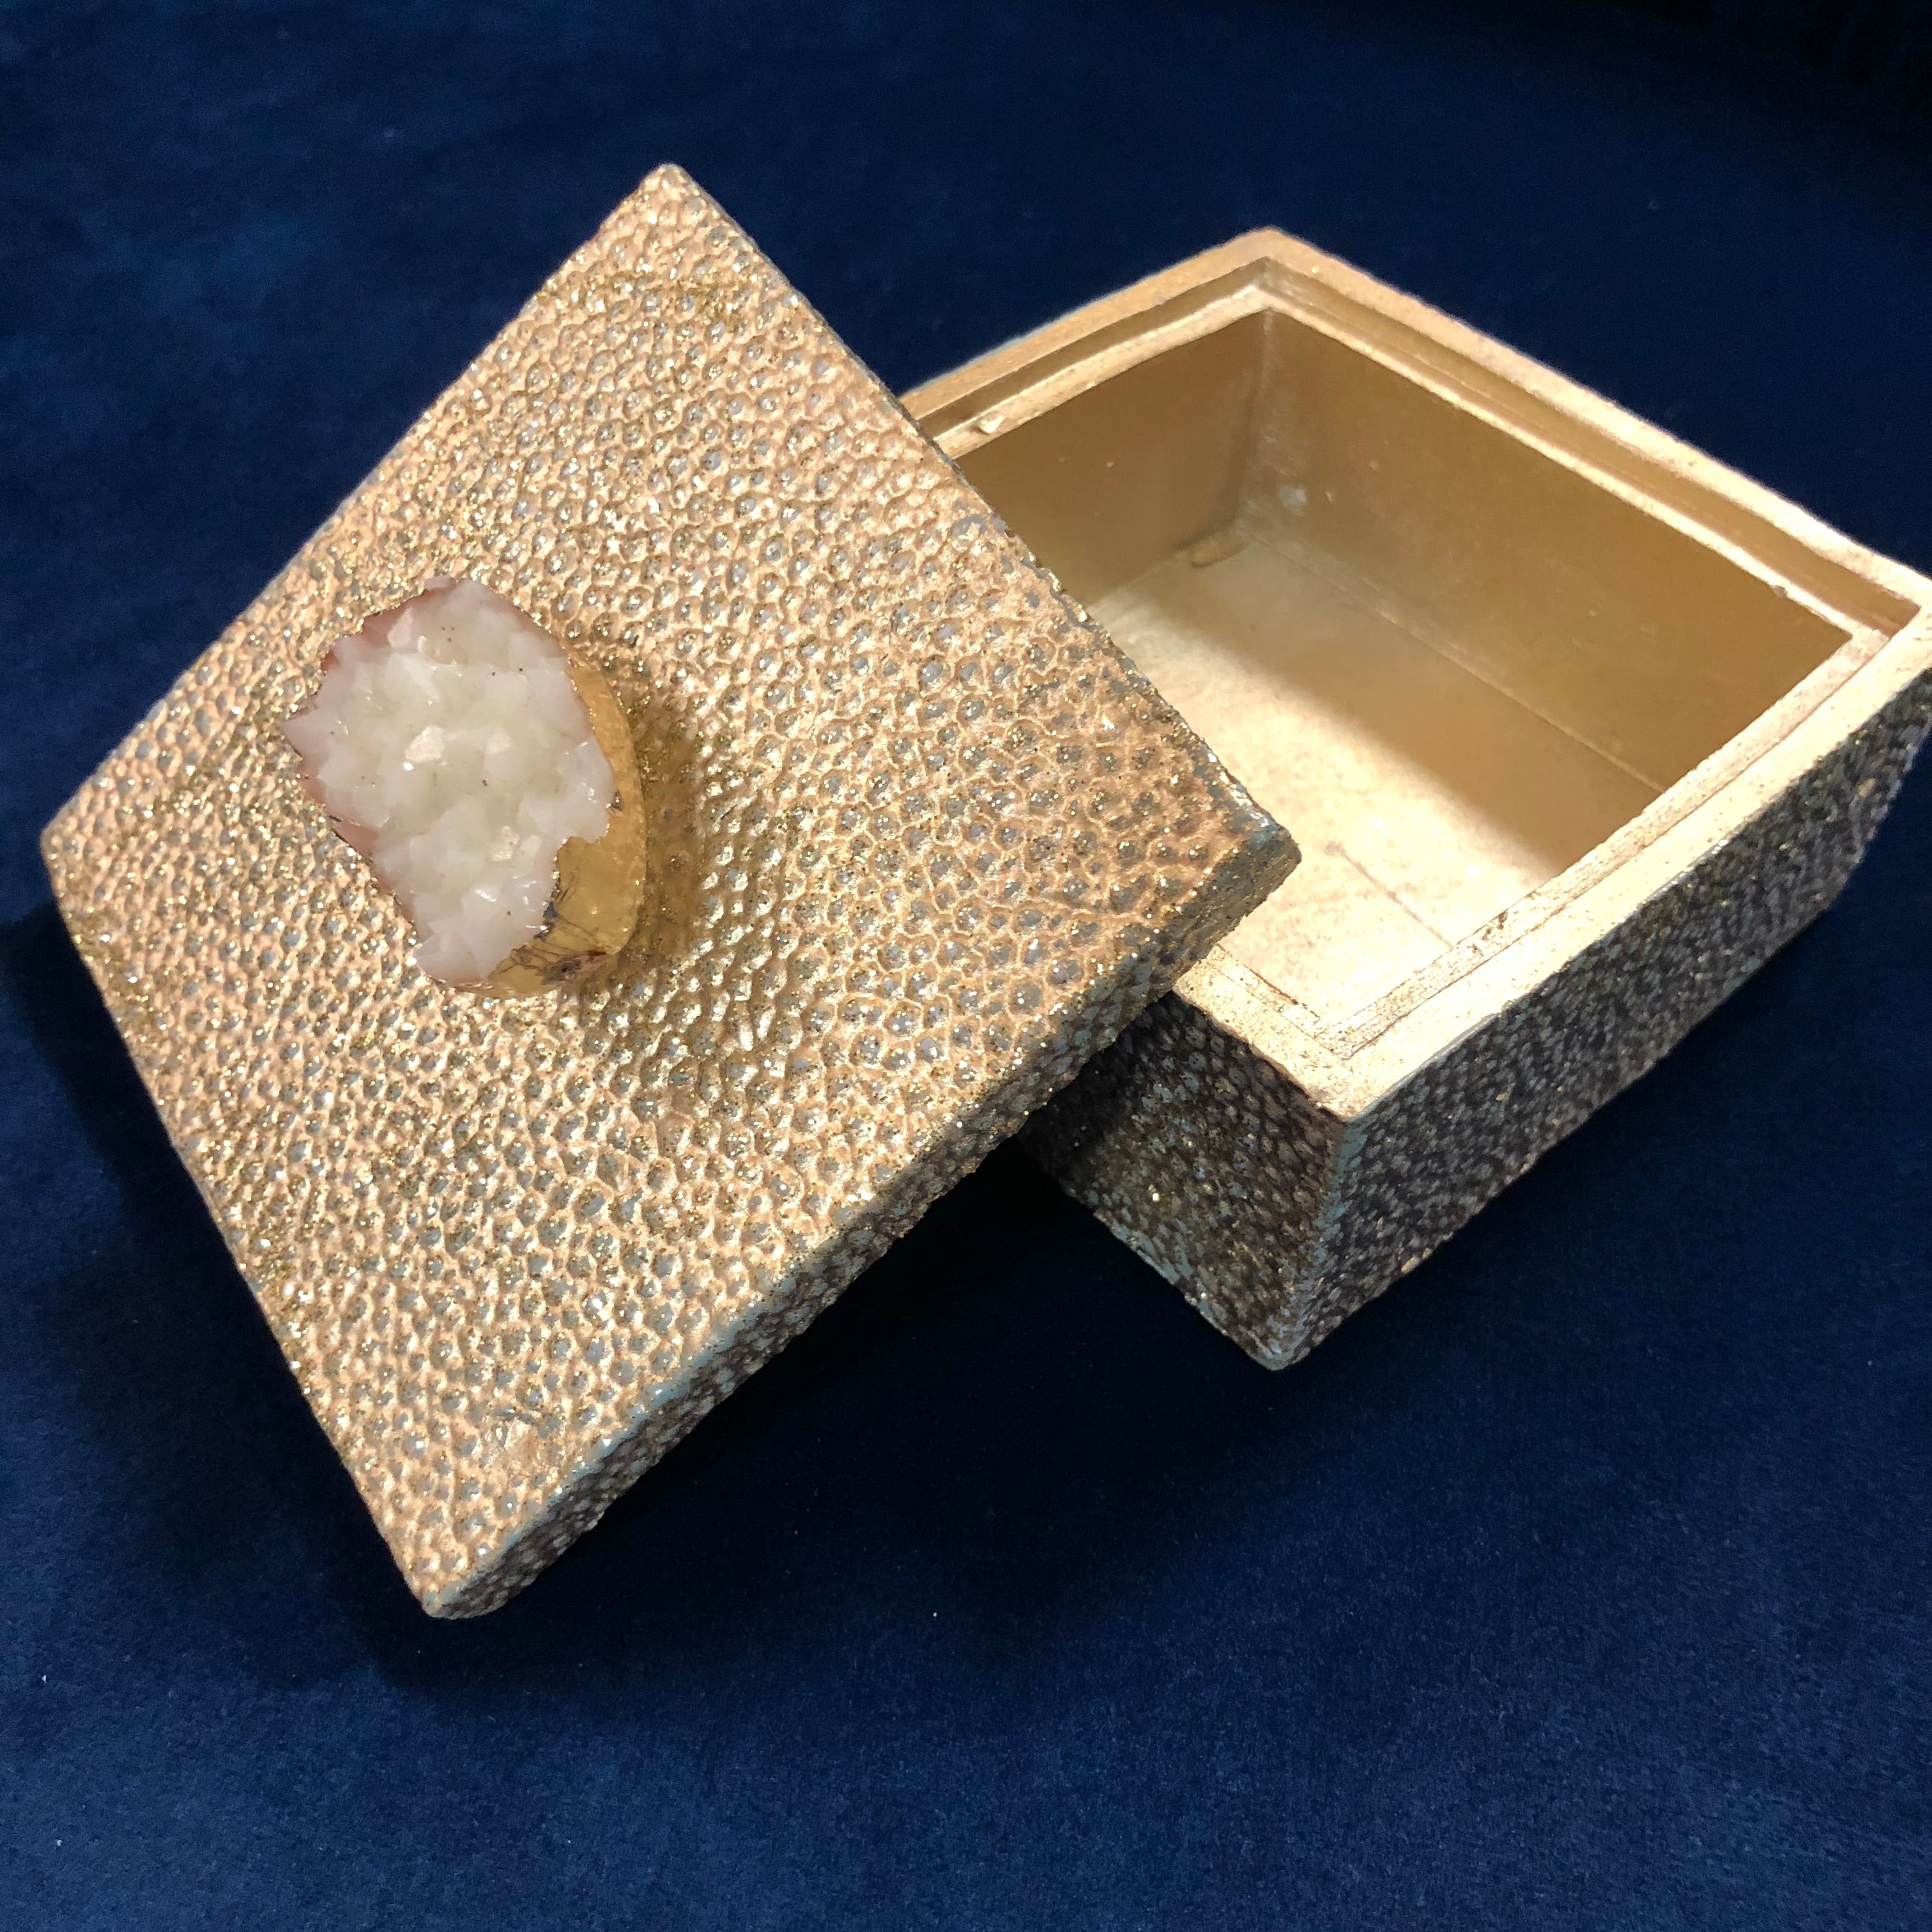 Opulent Earring Boxes, Metallic Faux Leather Gift Boxes